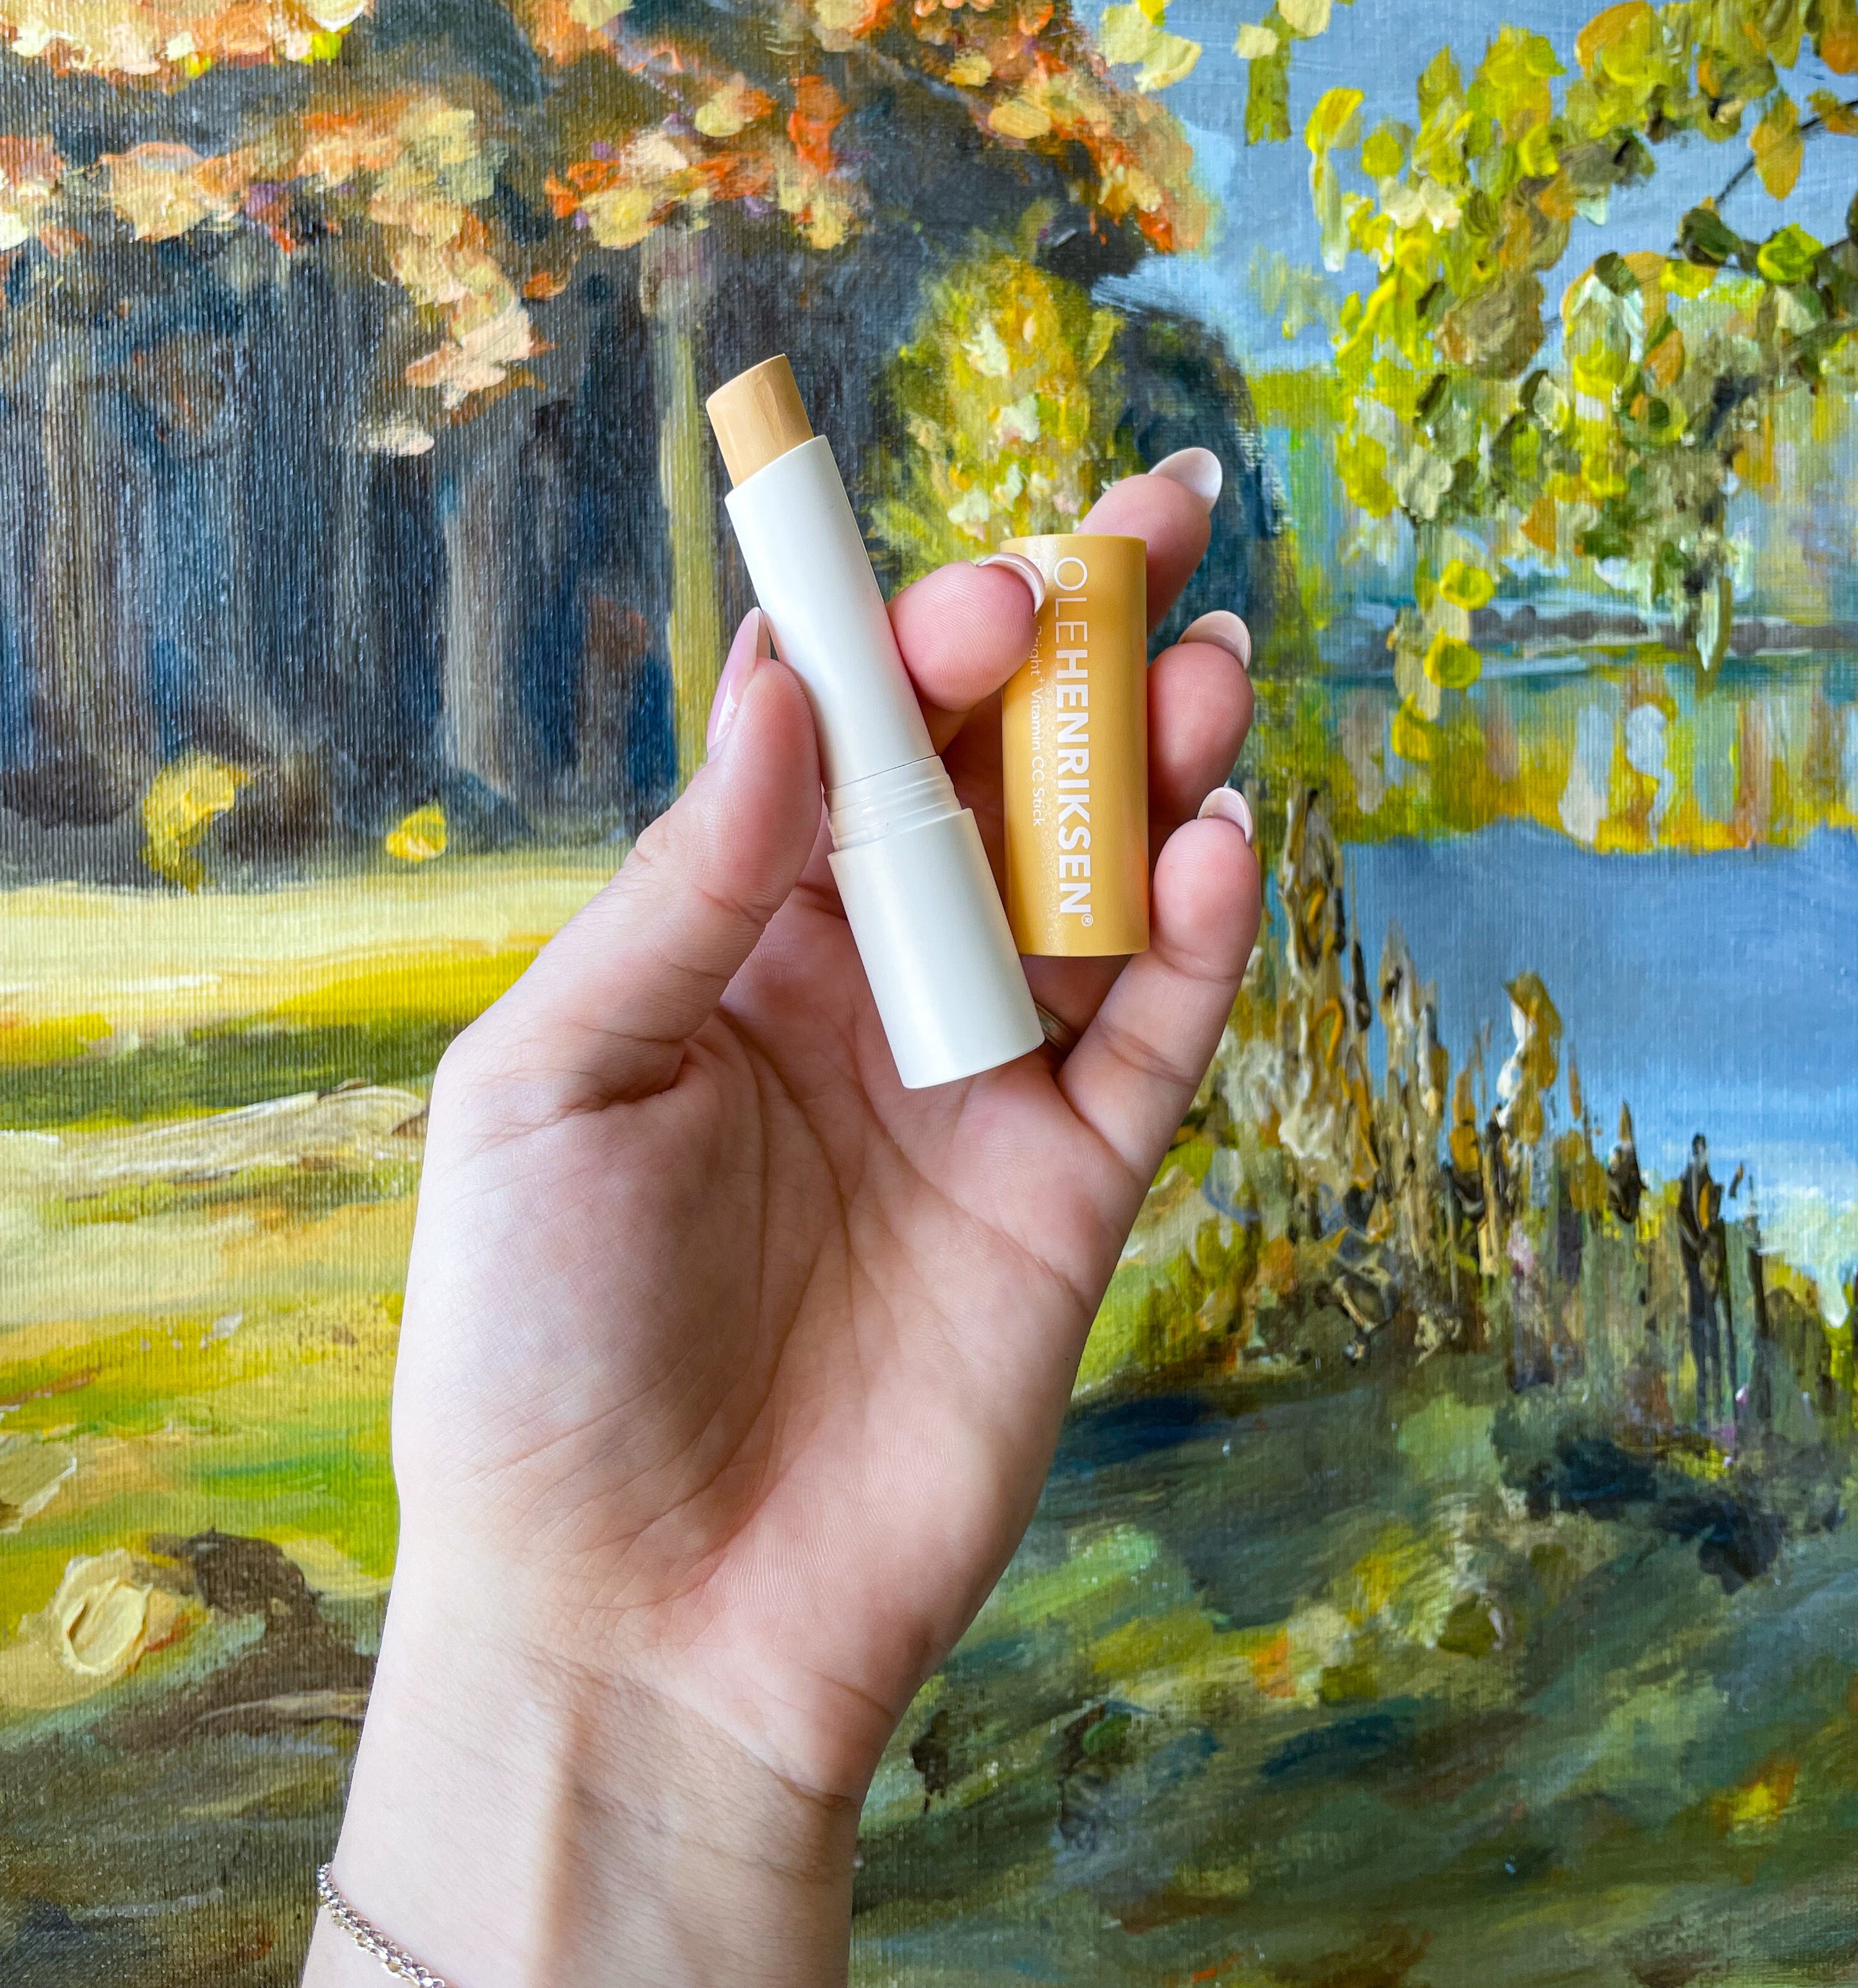 victoria holding a tube of the cc sticks against a painting